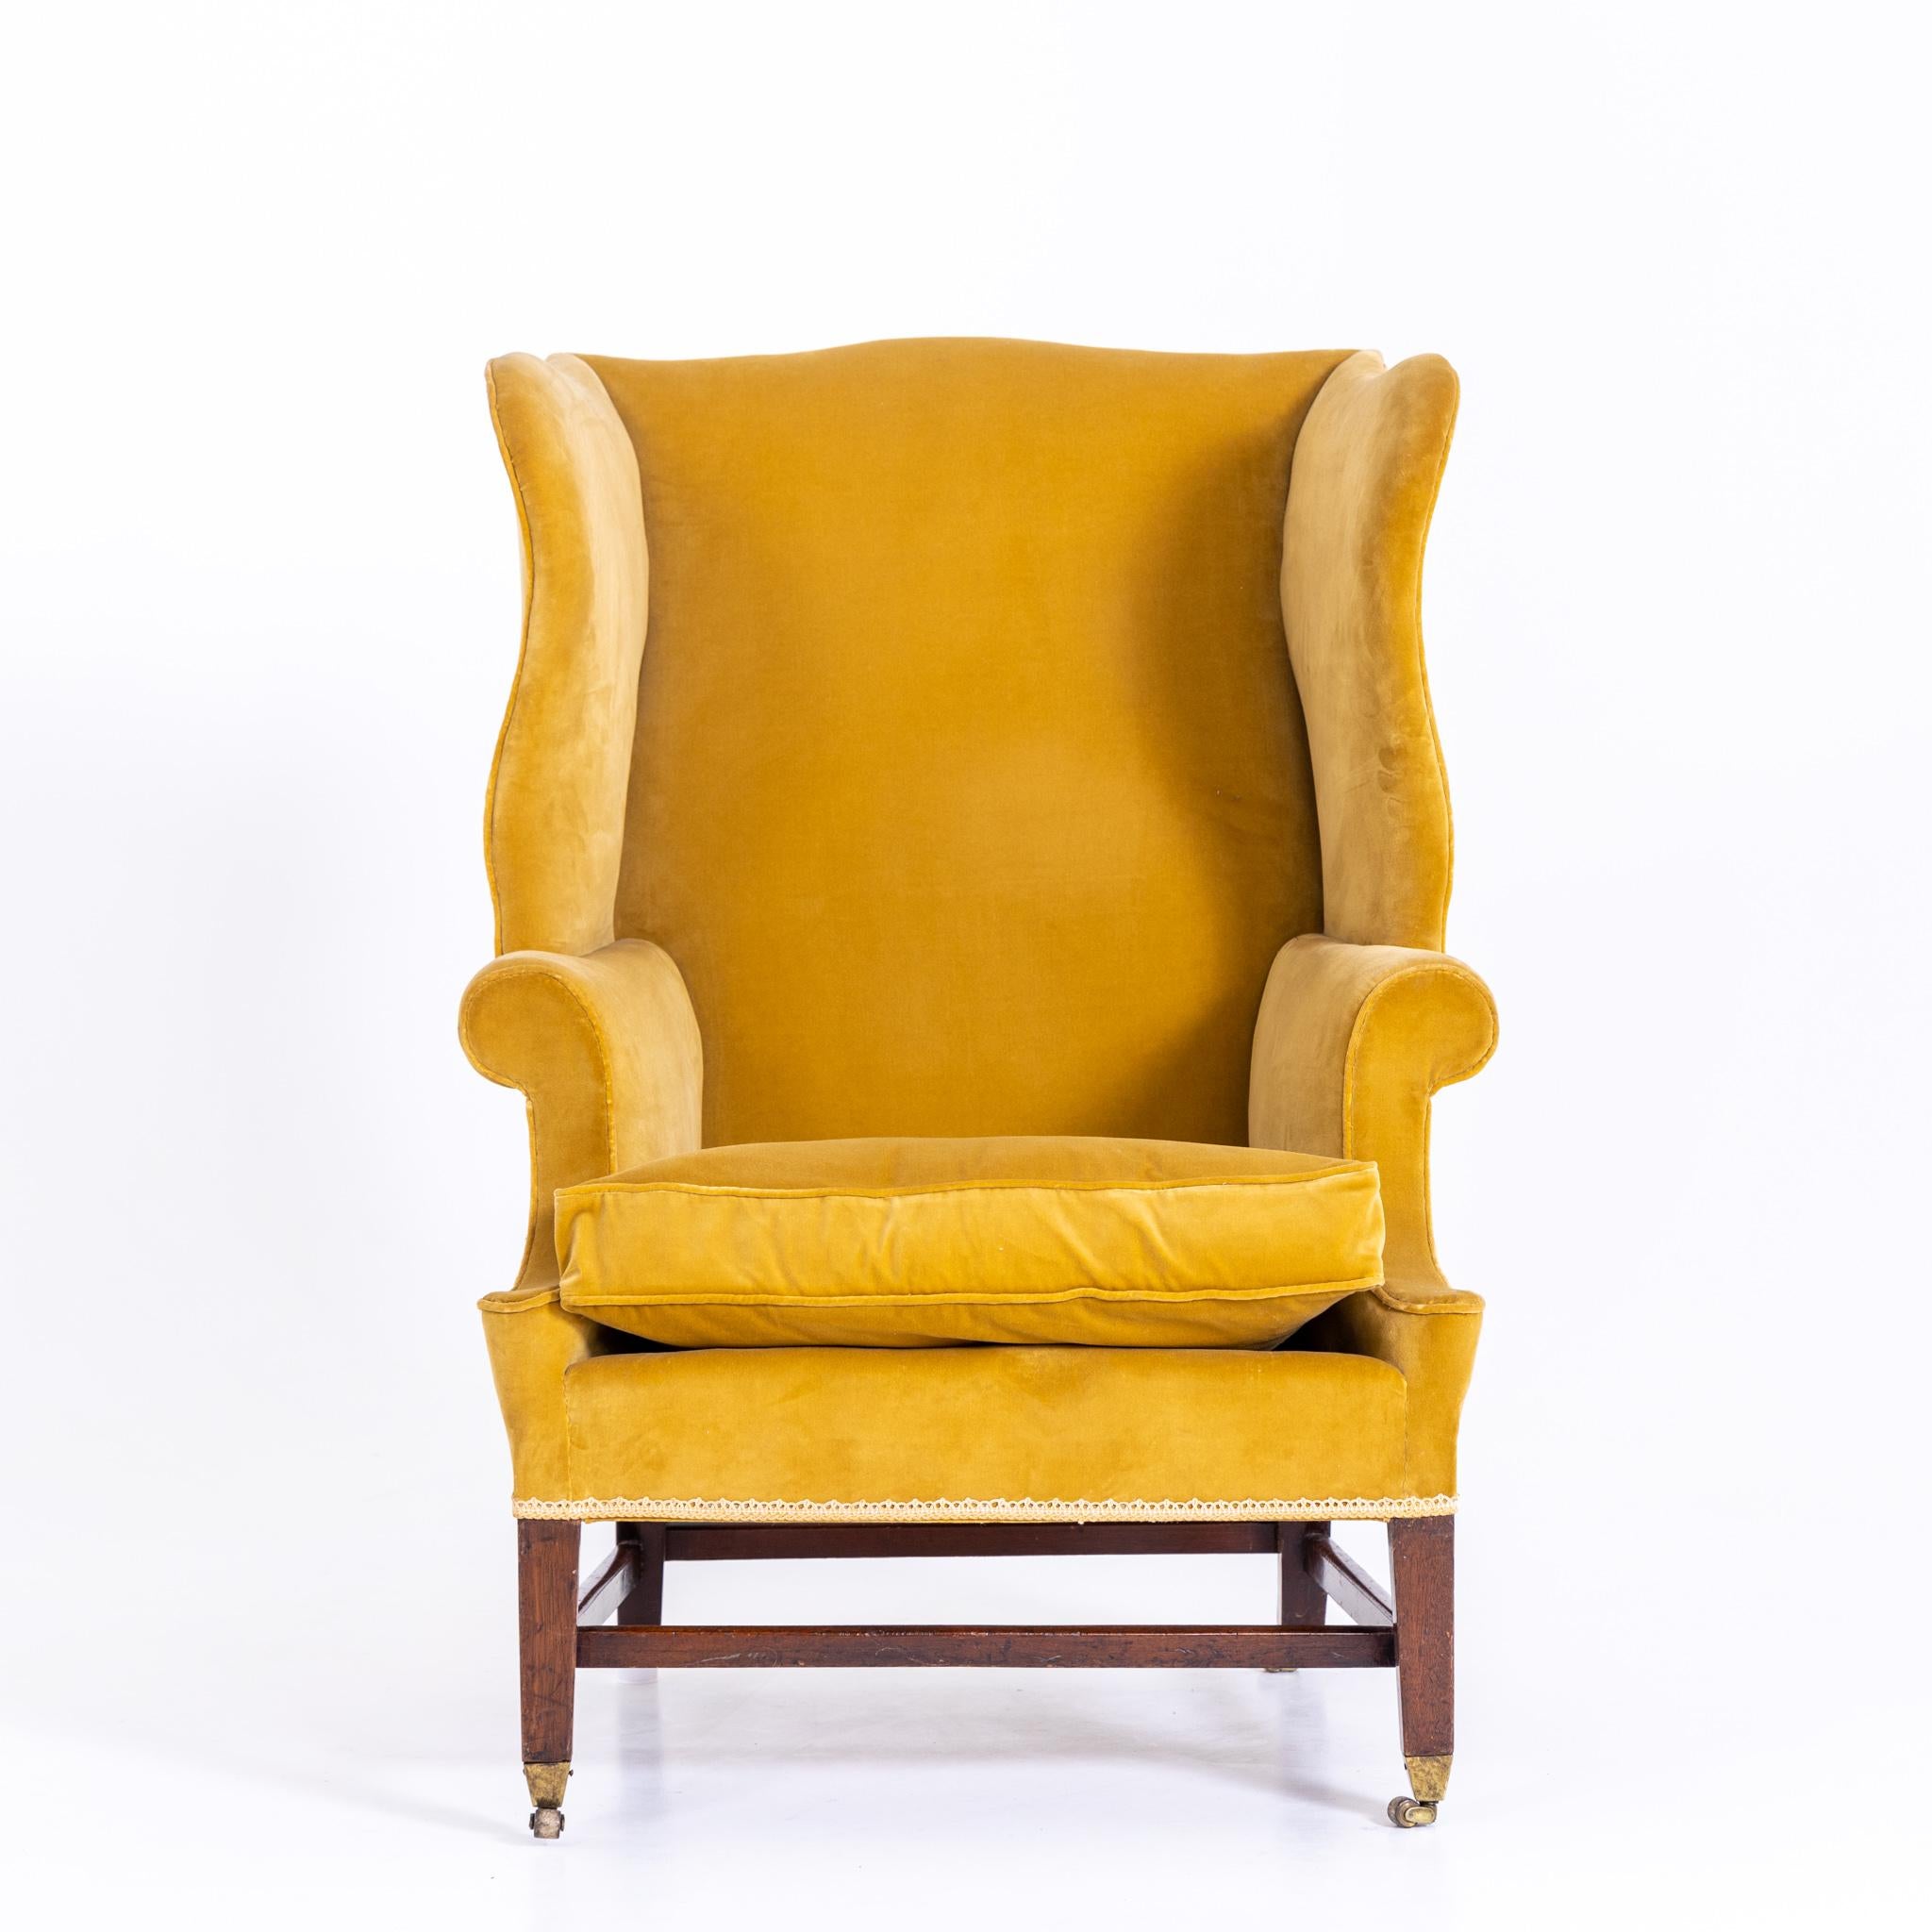 Yellow upholstered wingback armchair with high back on wooden frame with measuring castors.